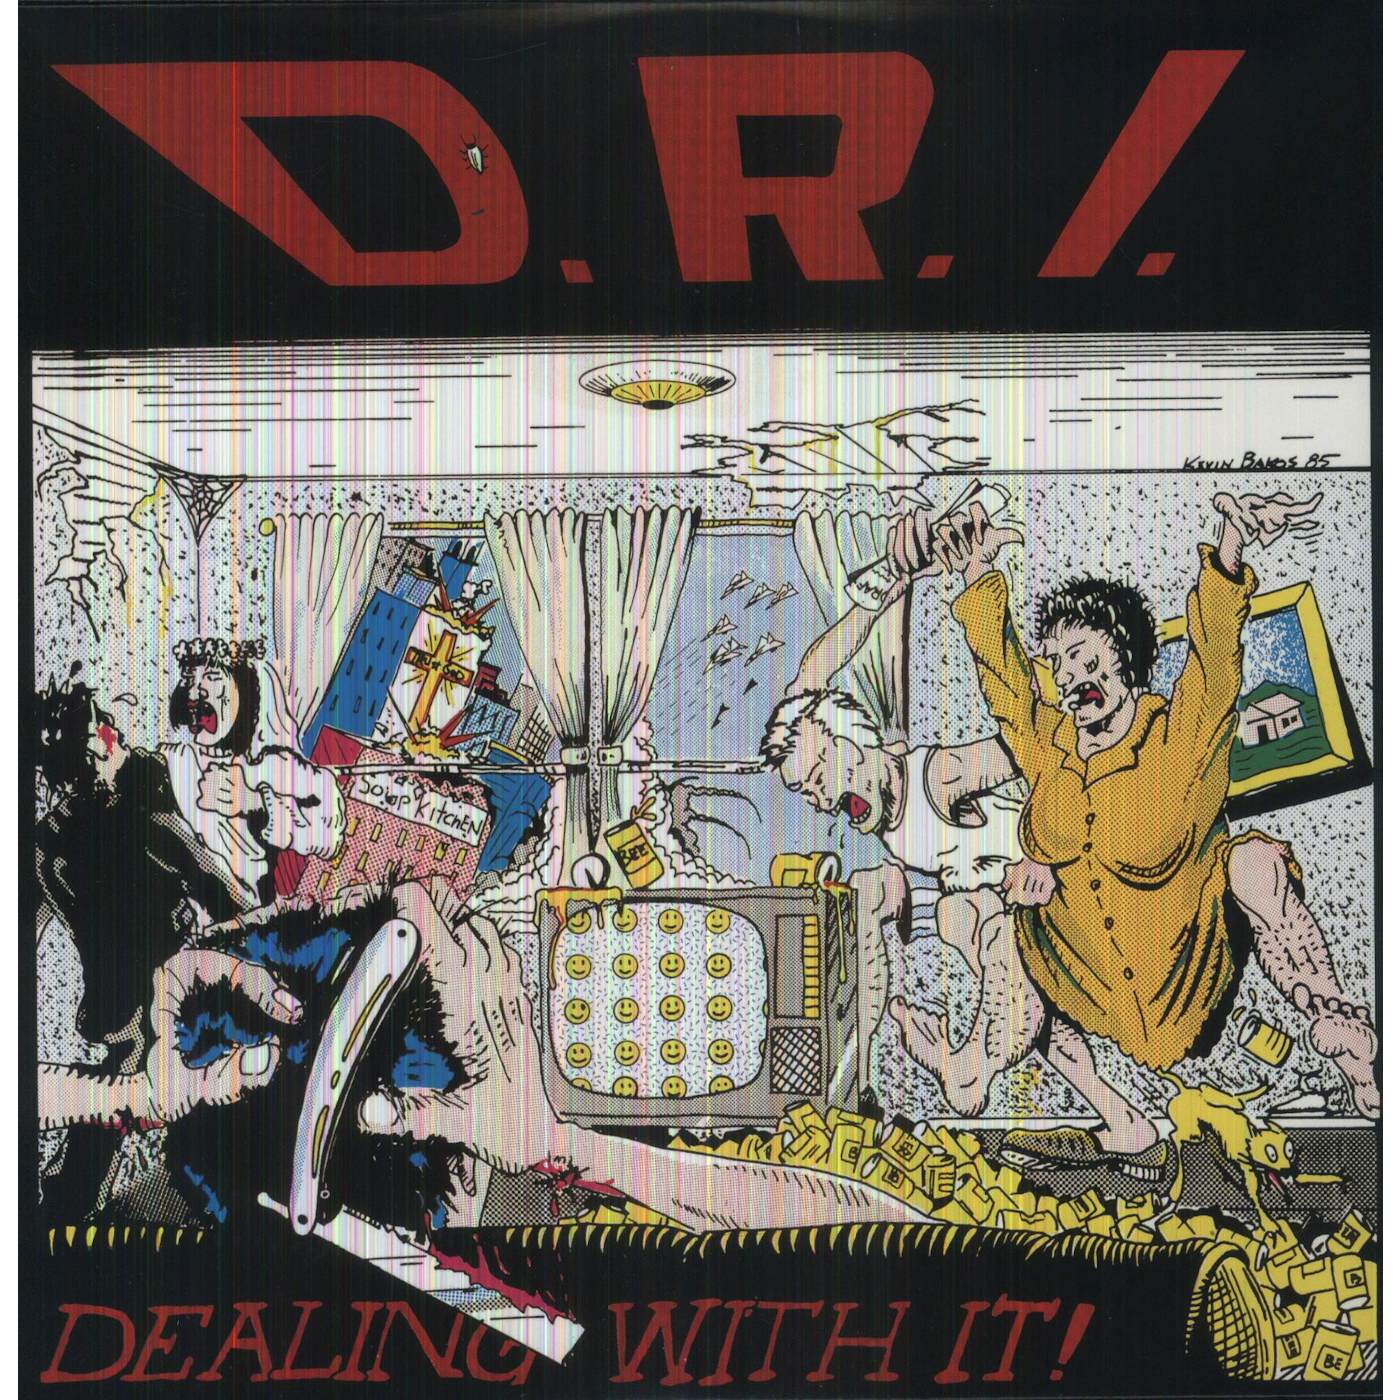 D.R.I. DEALING WITH IT Vinyl Record